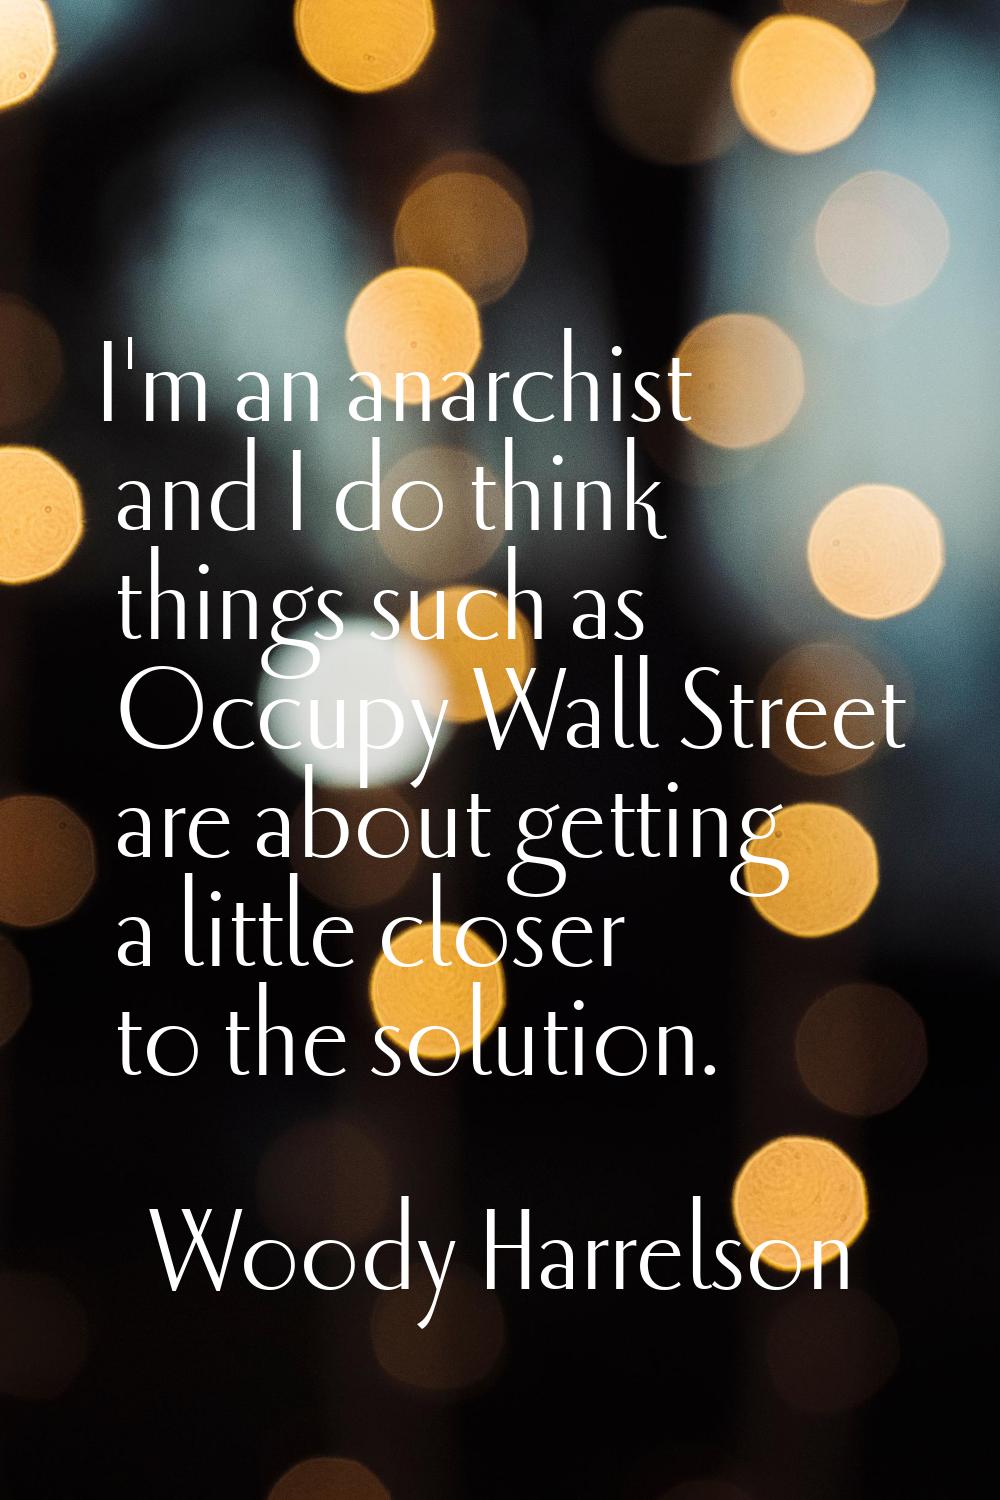 I'm an anarchist and I do think things such as Occupy Wall Street are about getting a little closer